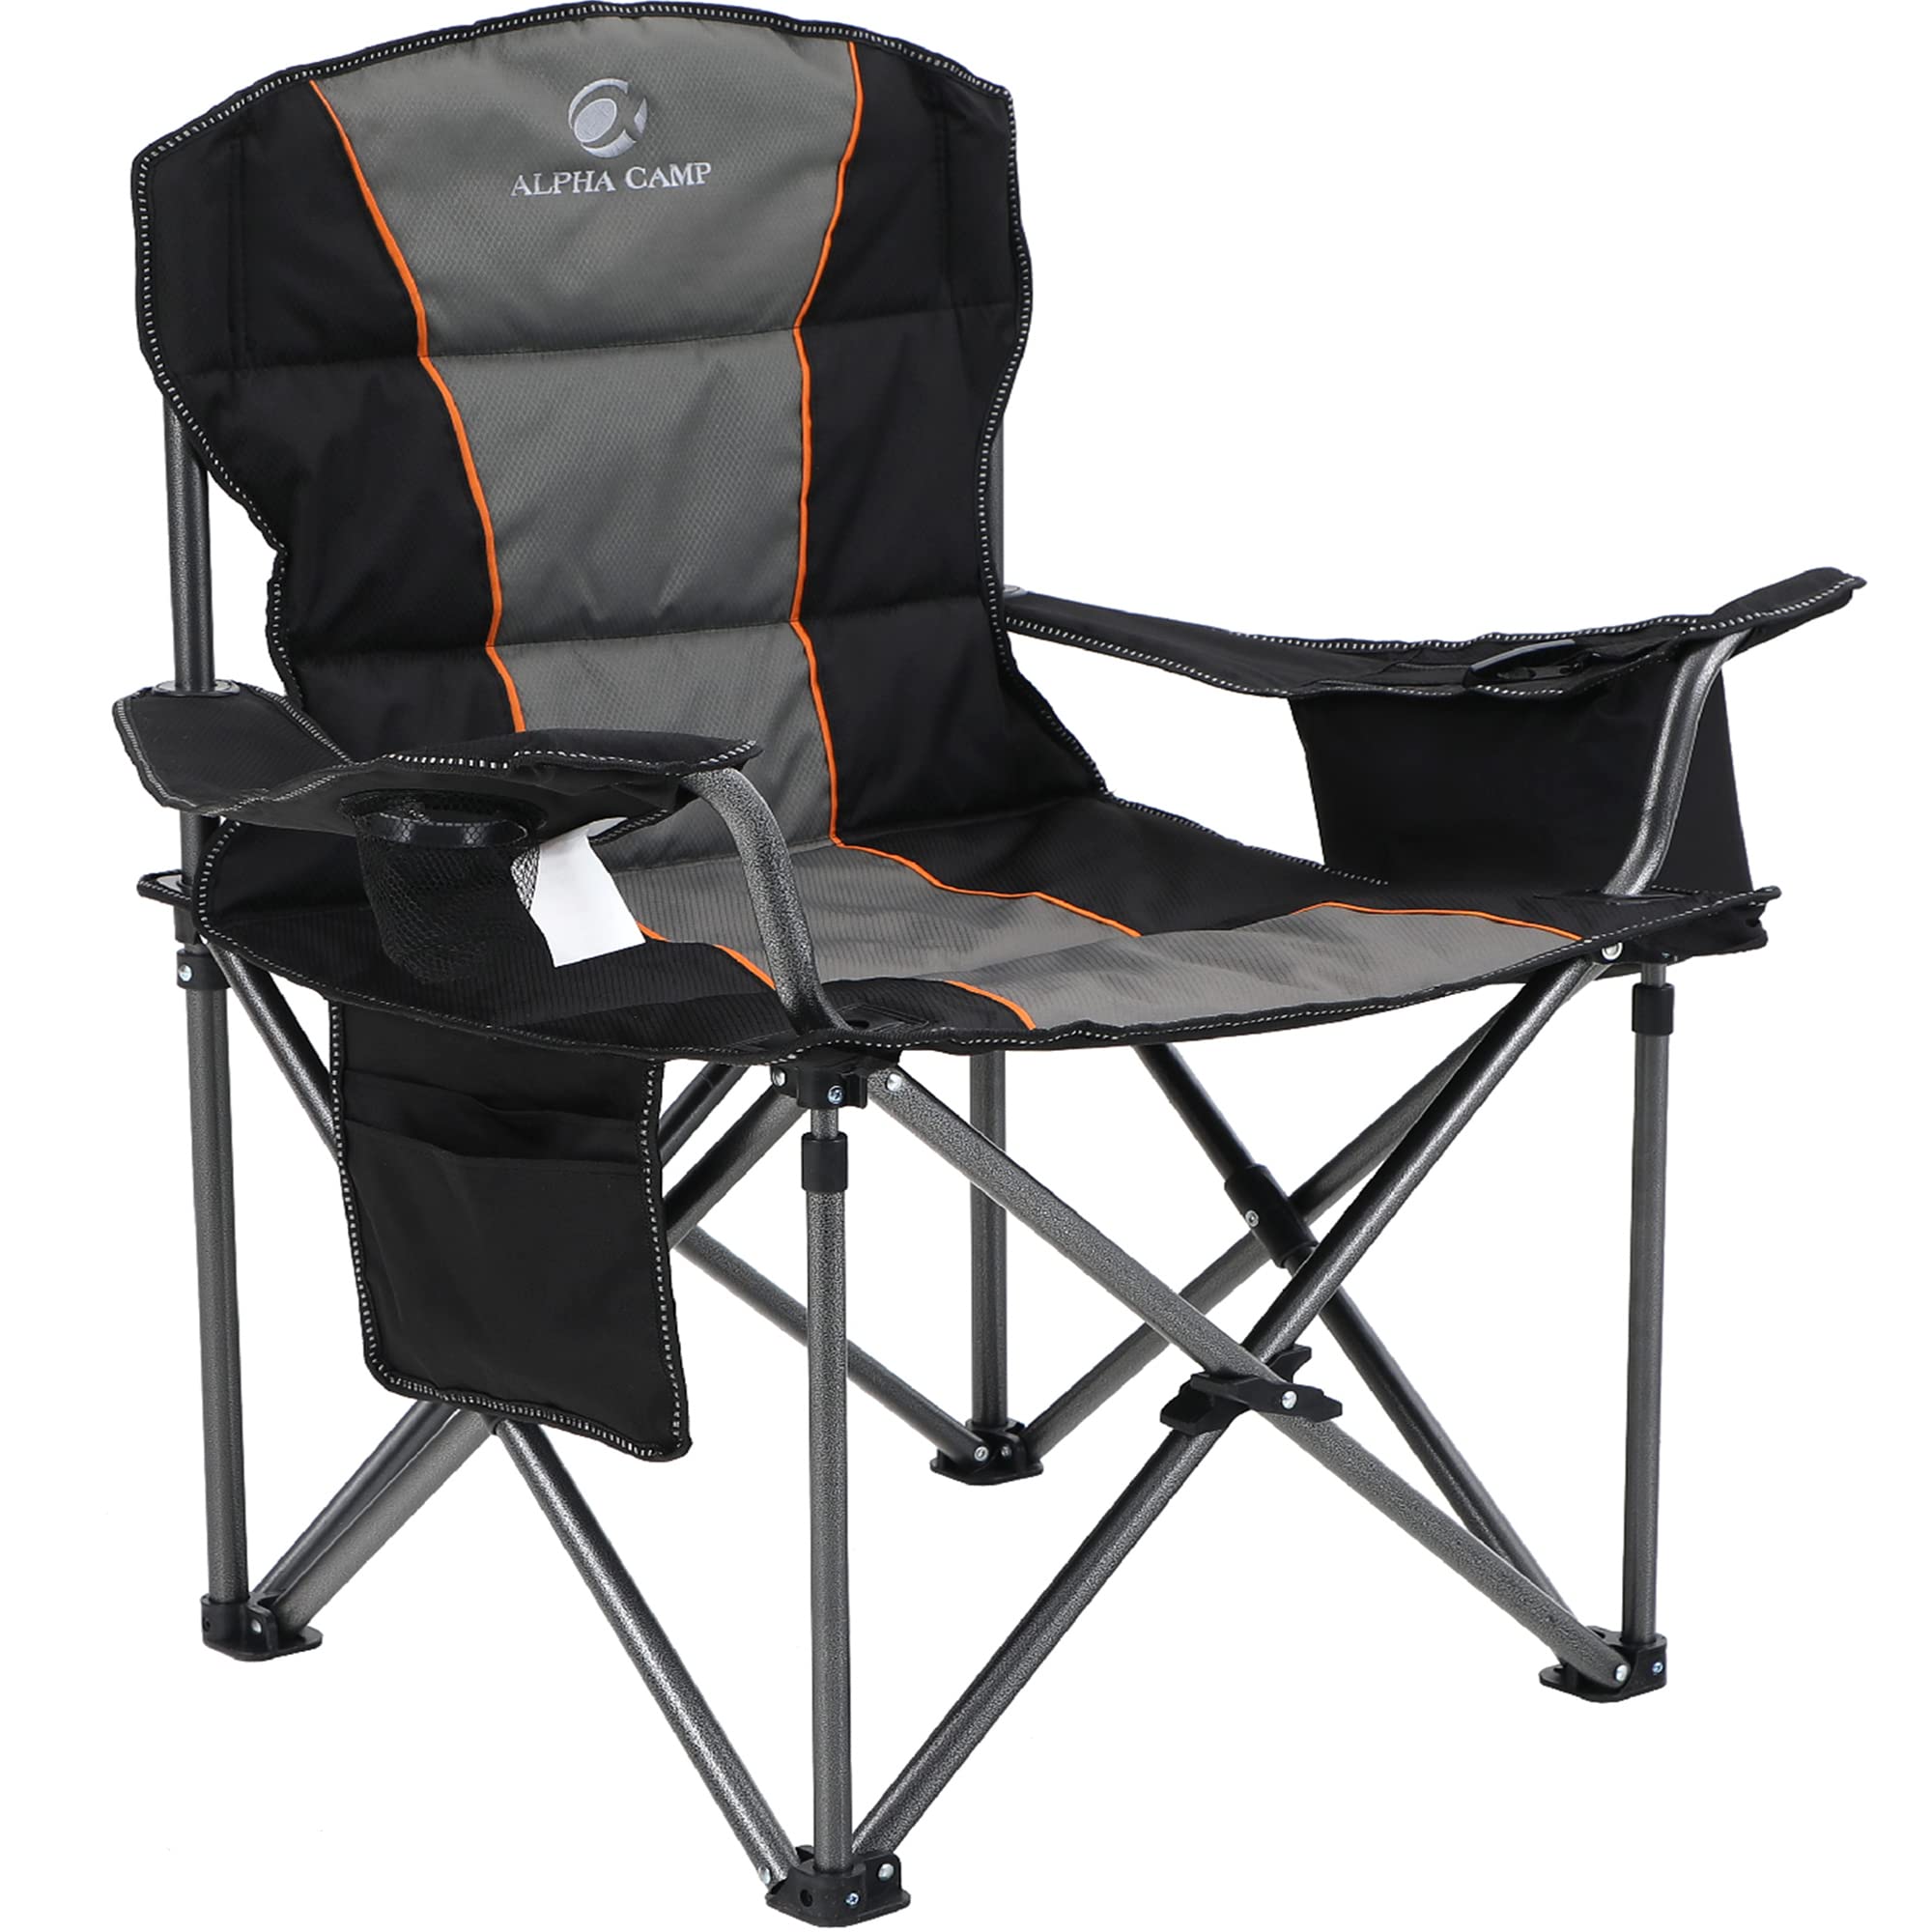 <a href="https://www.amazon.com/ALPHA-CAMP-Oversized-Collapsible-Portable/dp/B07MD8HQL6?tag=thecampfire0d-20">ALPHA CAMP Oversized Camping Folding Chair</a>